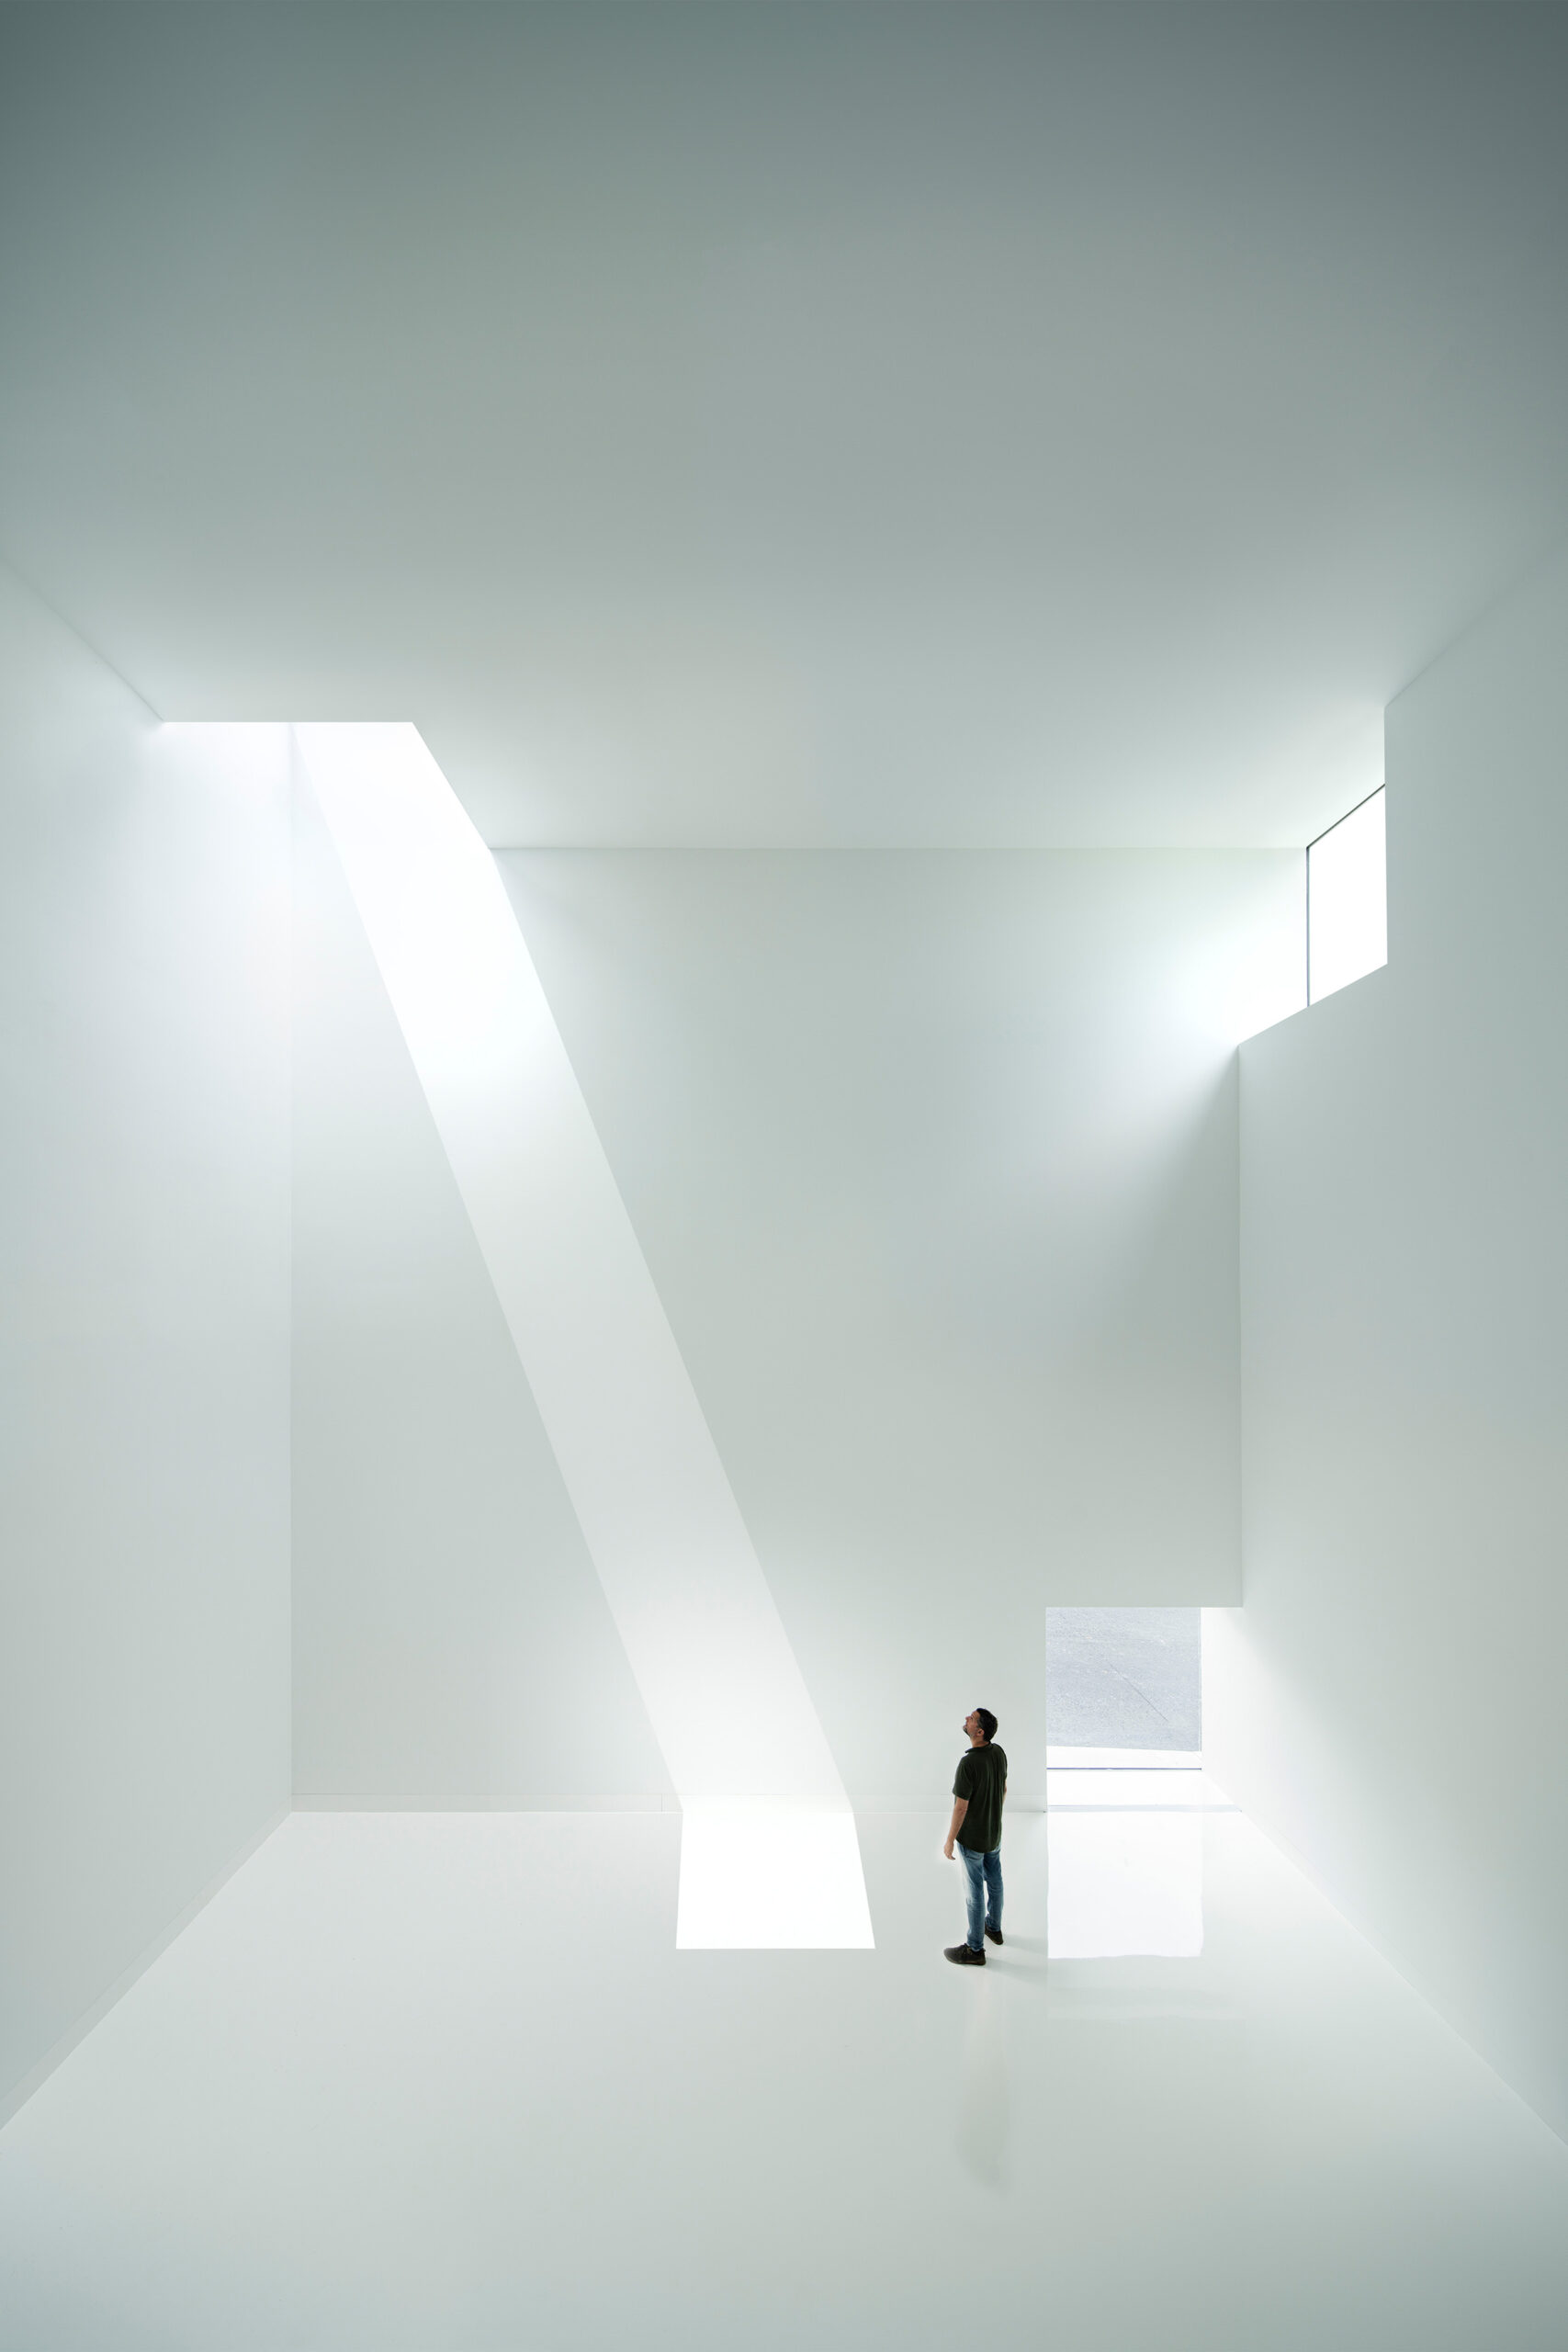 Natural light streams into a room of the Robert Olnick Pavilion in Cold Spring, NY